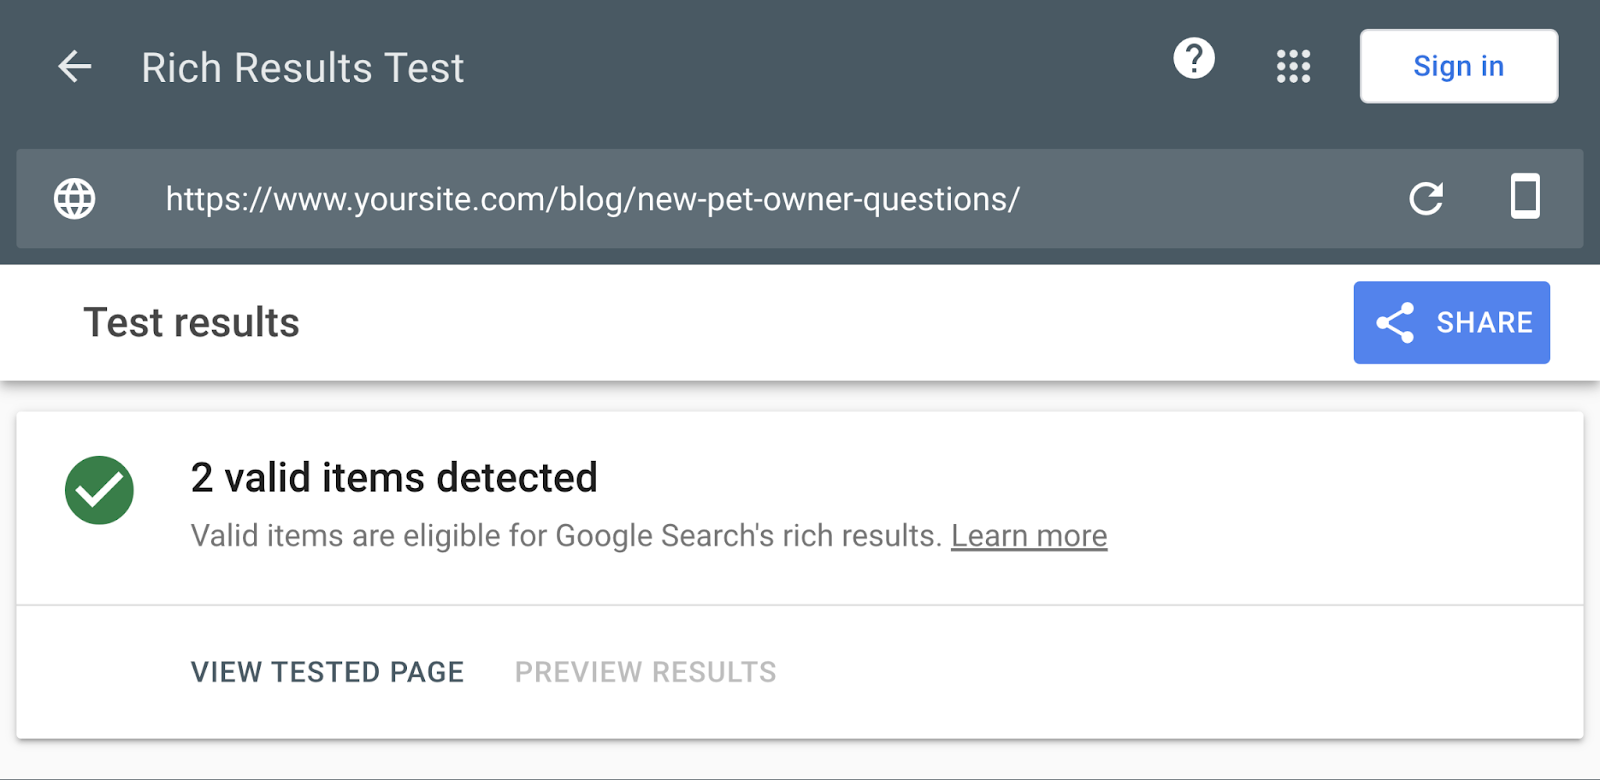 Rich Results Test results page showing "2 valid items detected"